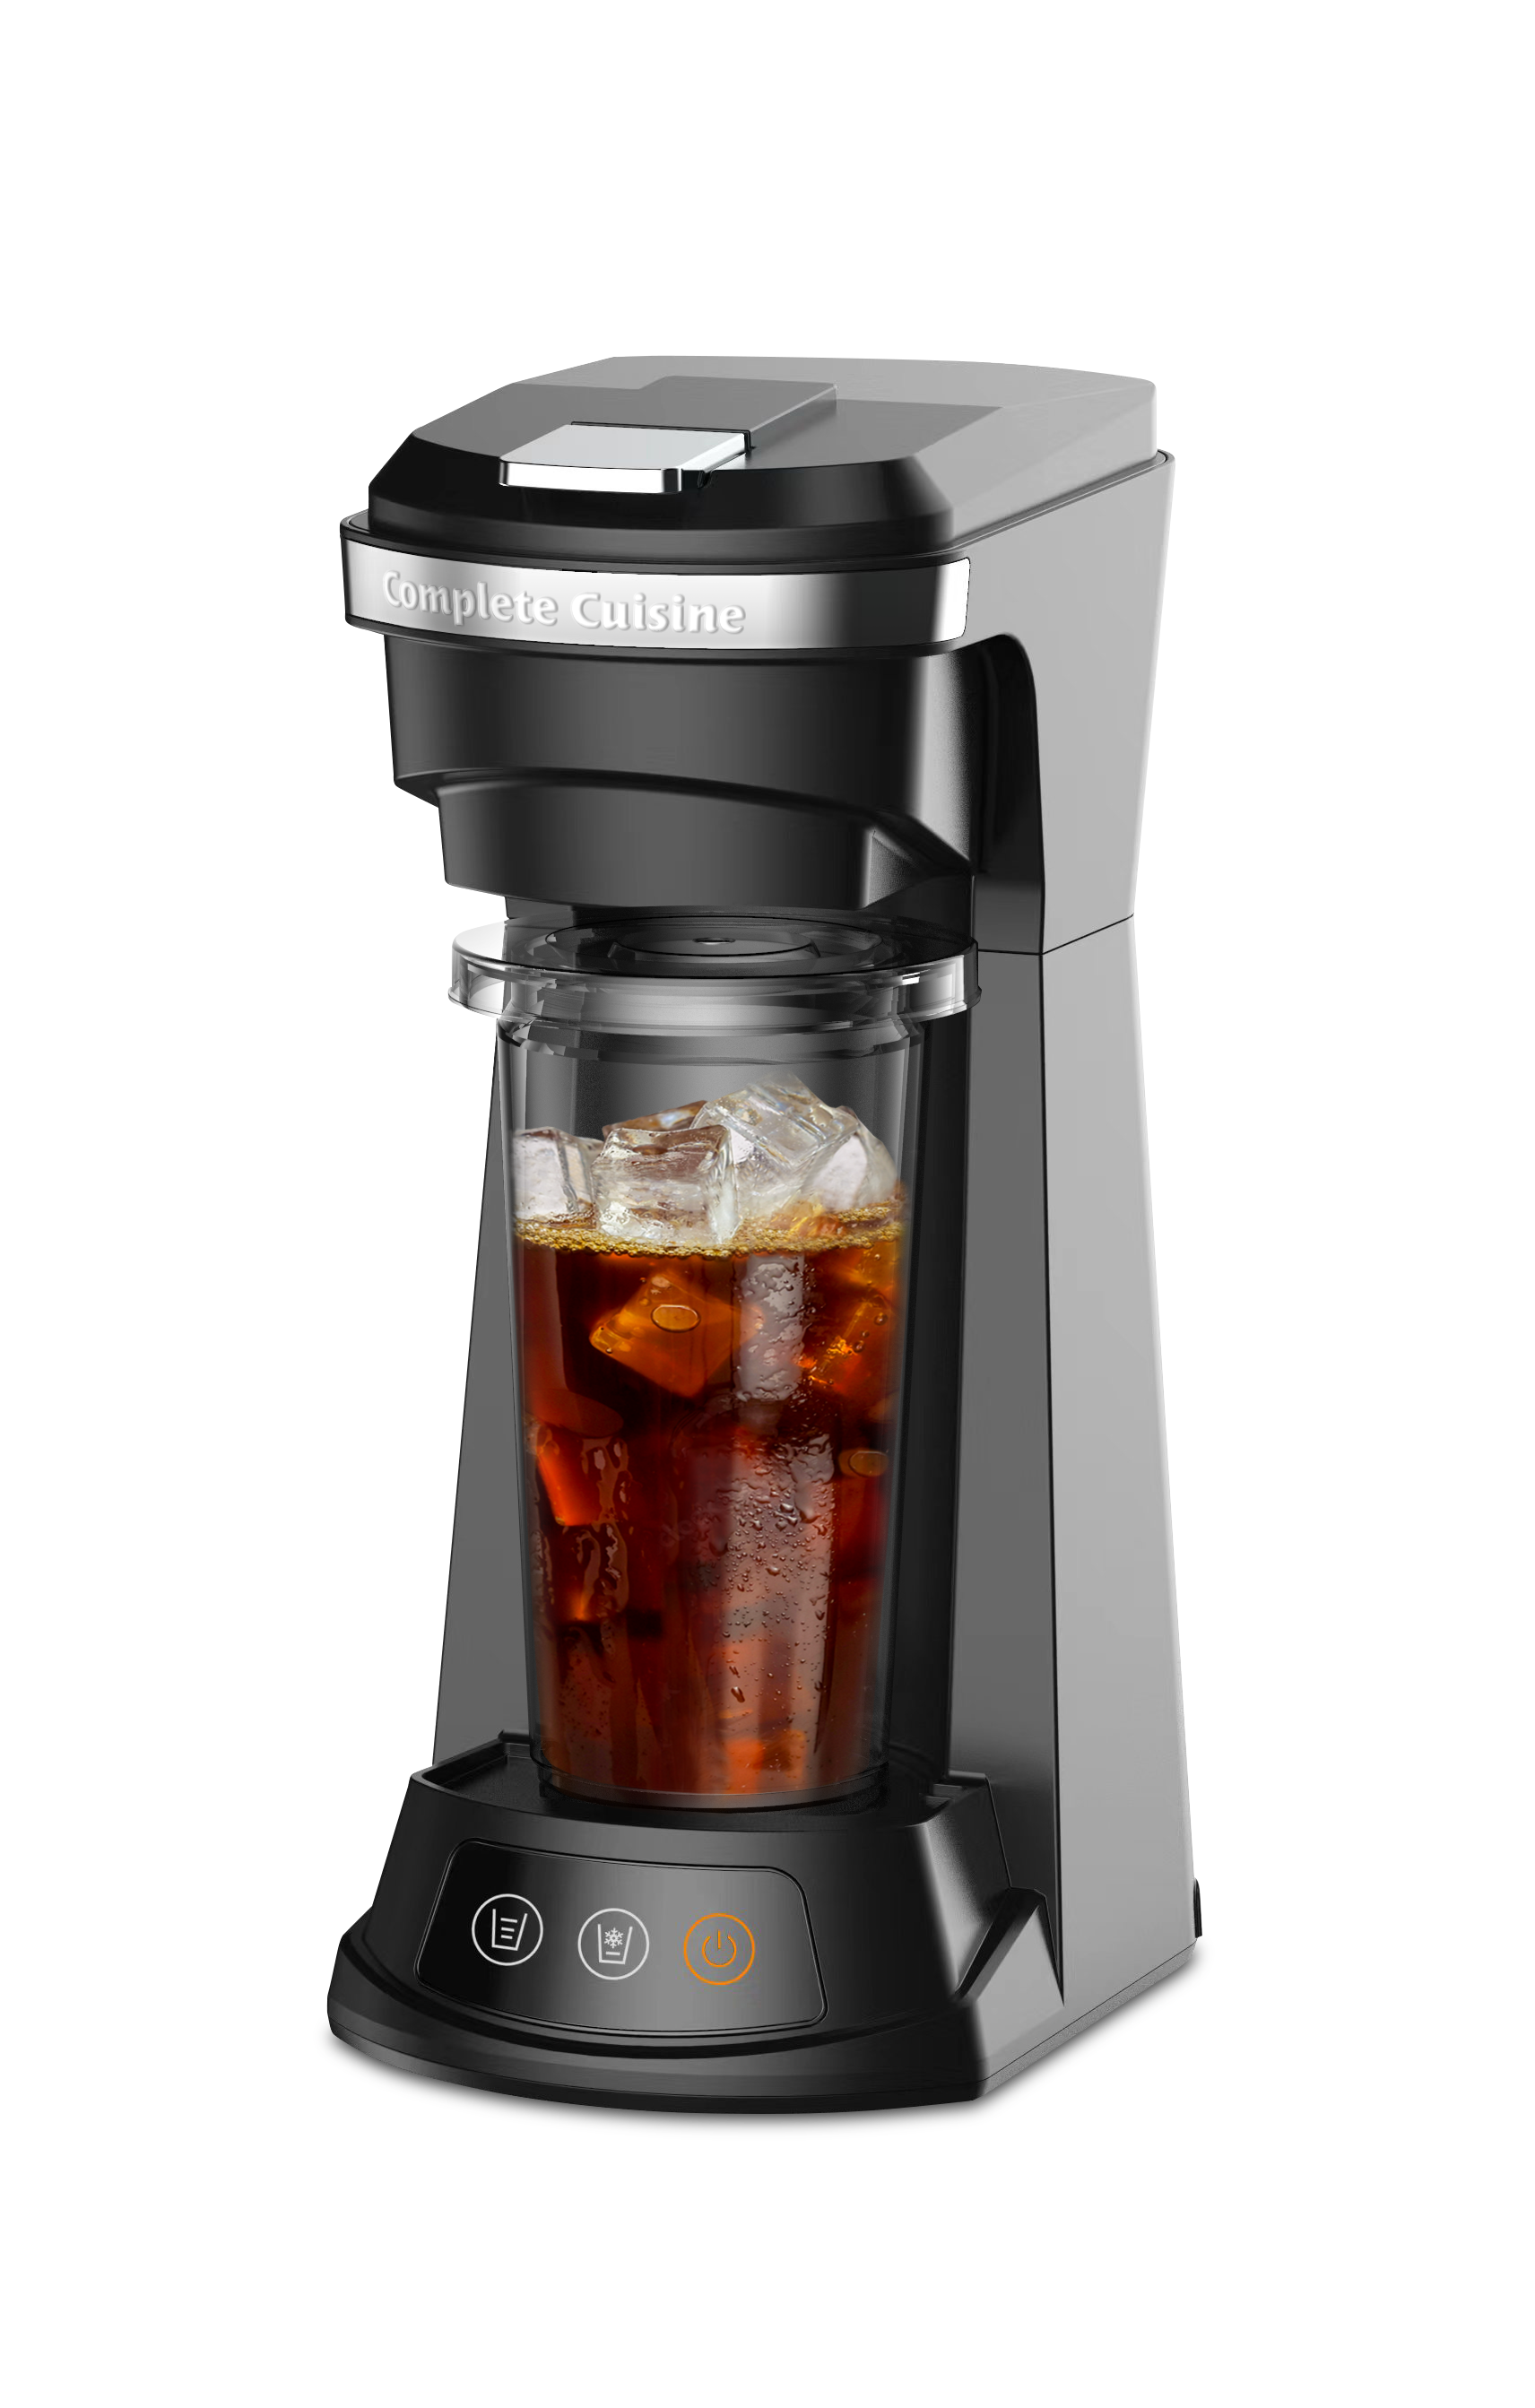 Hot & Cold Single Serve Coffee Maker for K Cup & Grounds